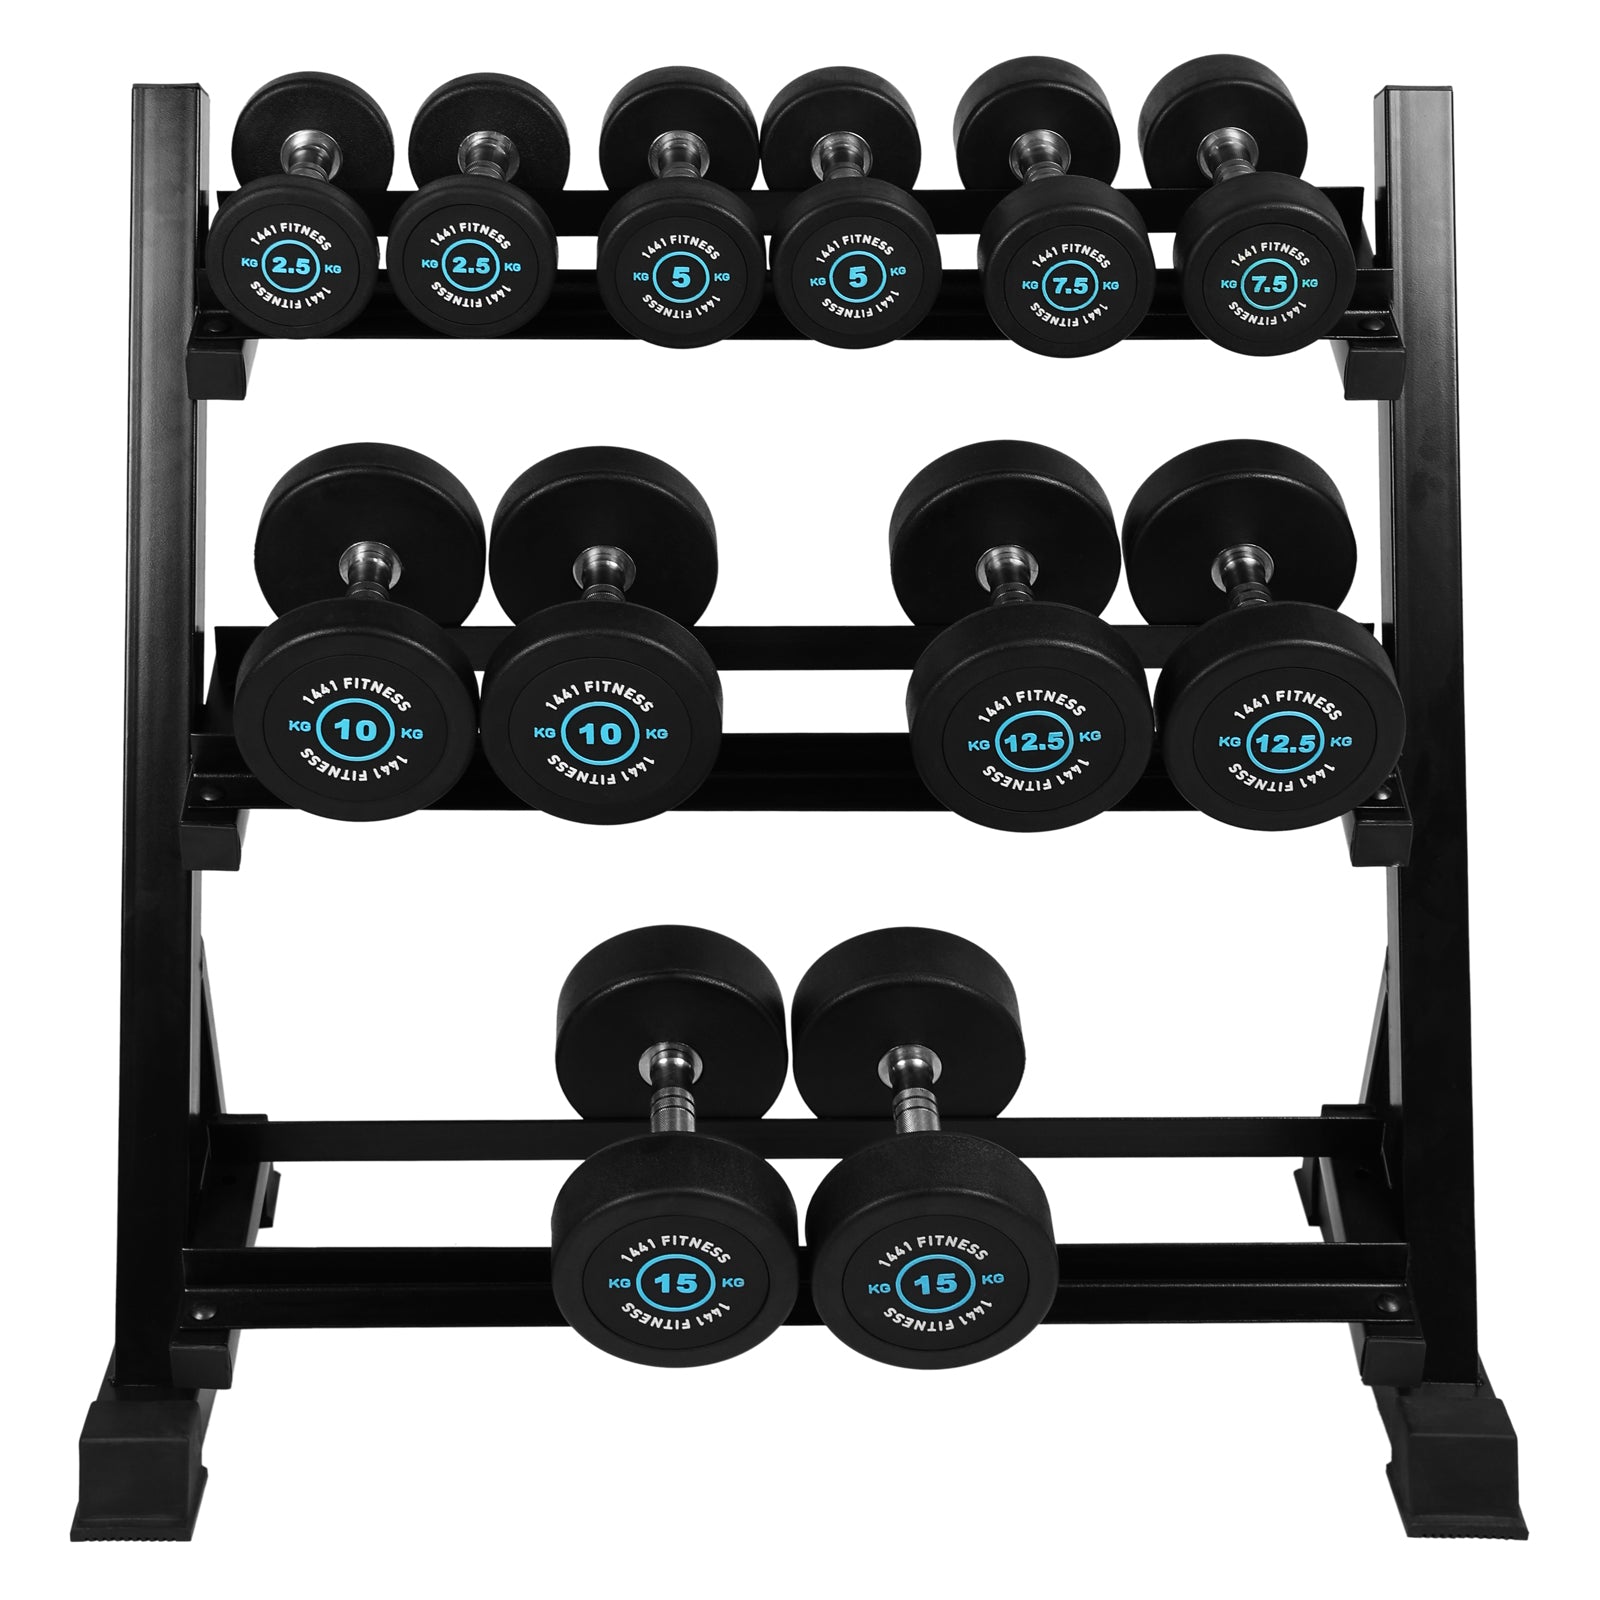 1441 Fitness Premium Round Dumbbell Set 2.5 Kg to 15 Kg (6 Pairs) Blue with 3 Tier Rack